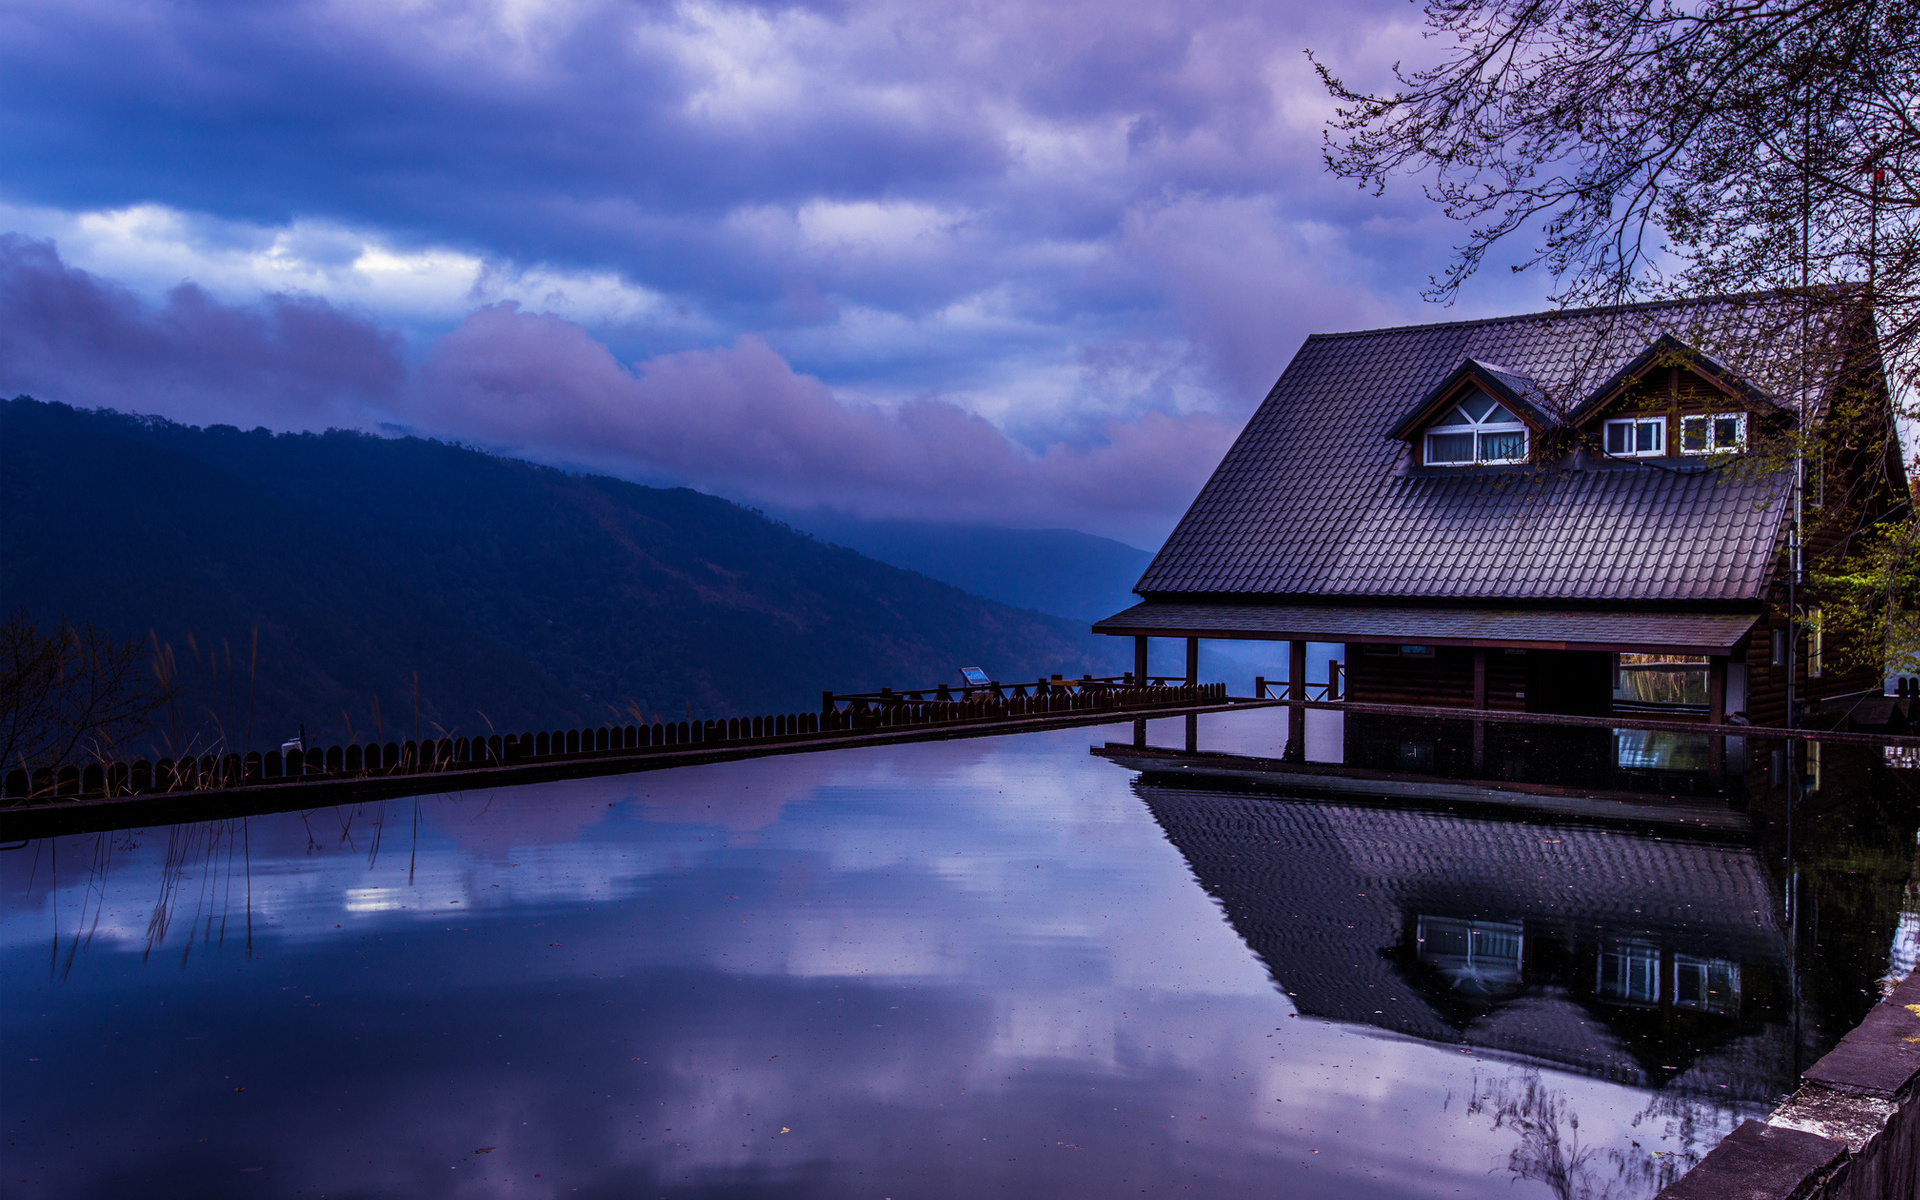 Wallpaper Blink of Cabin Wallpaper HD for Android, Windows